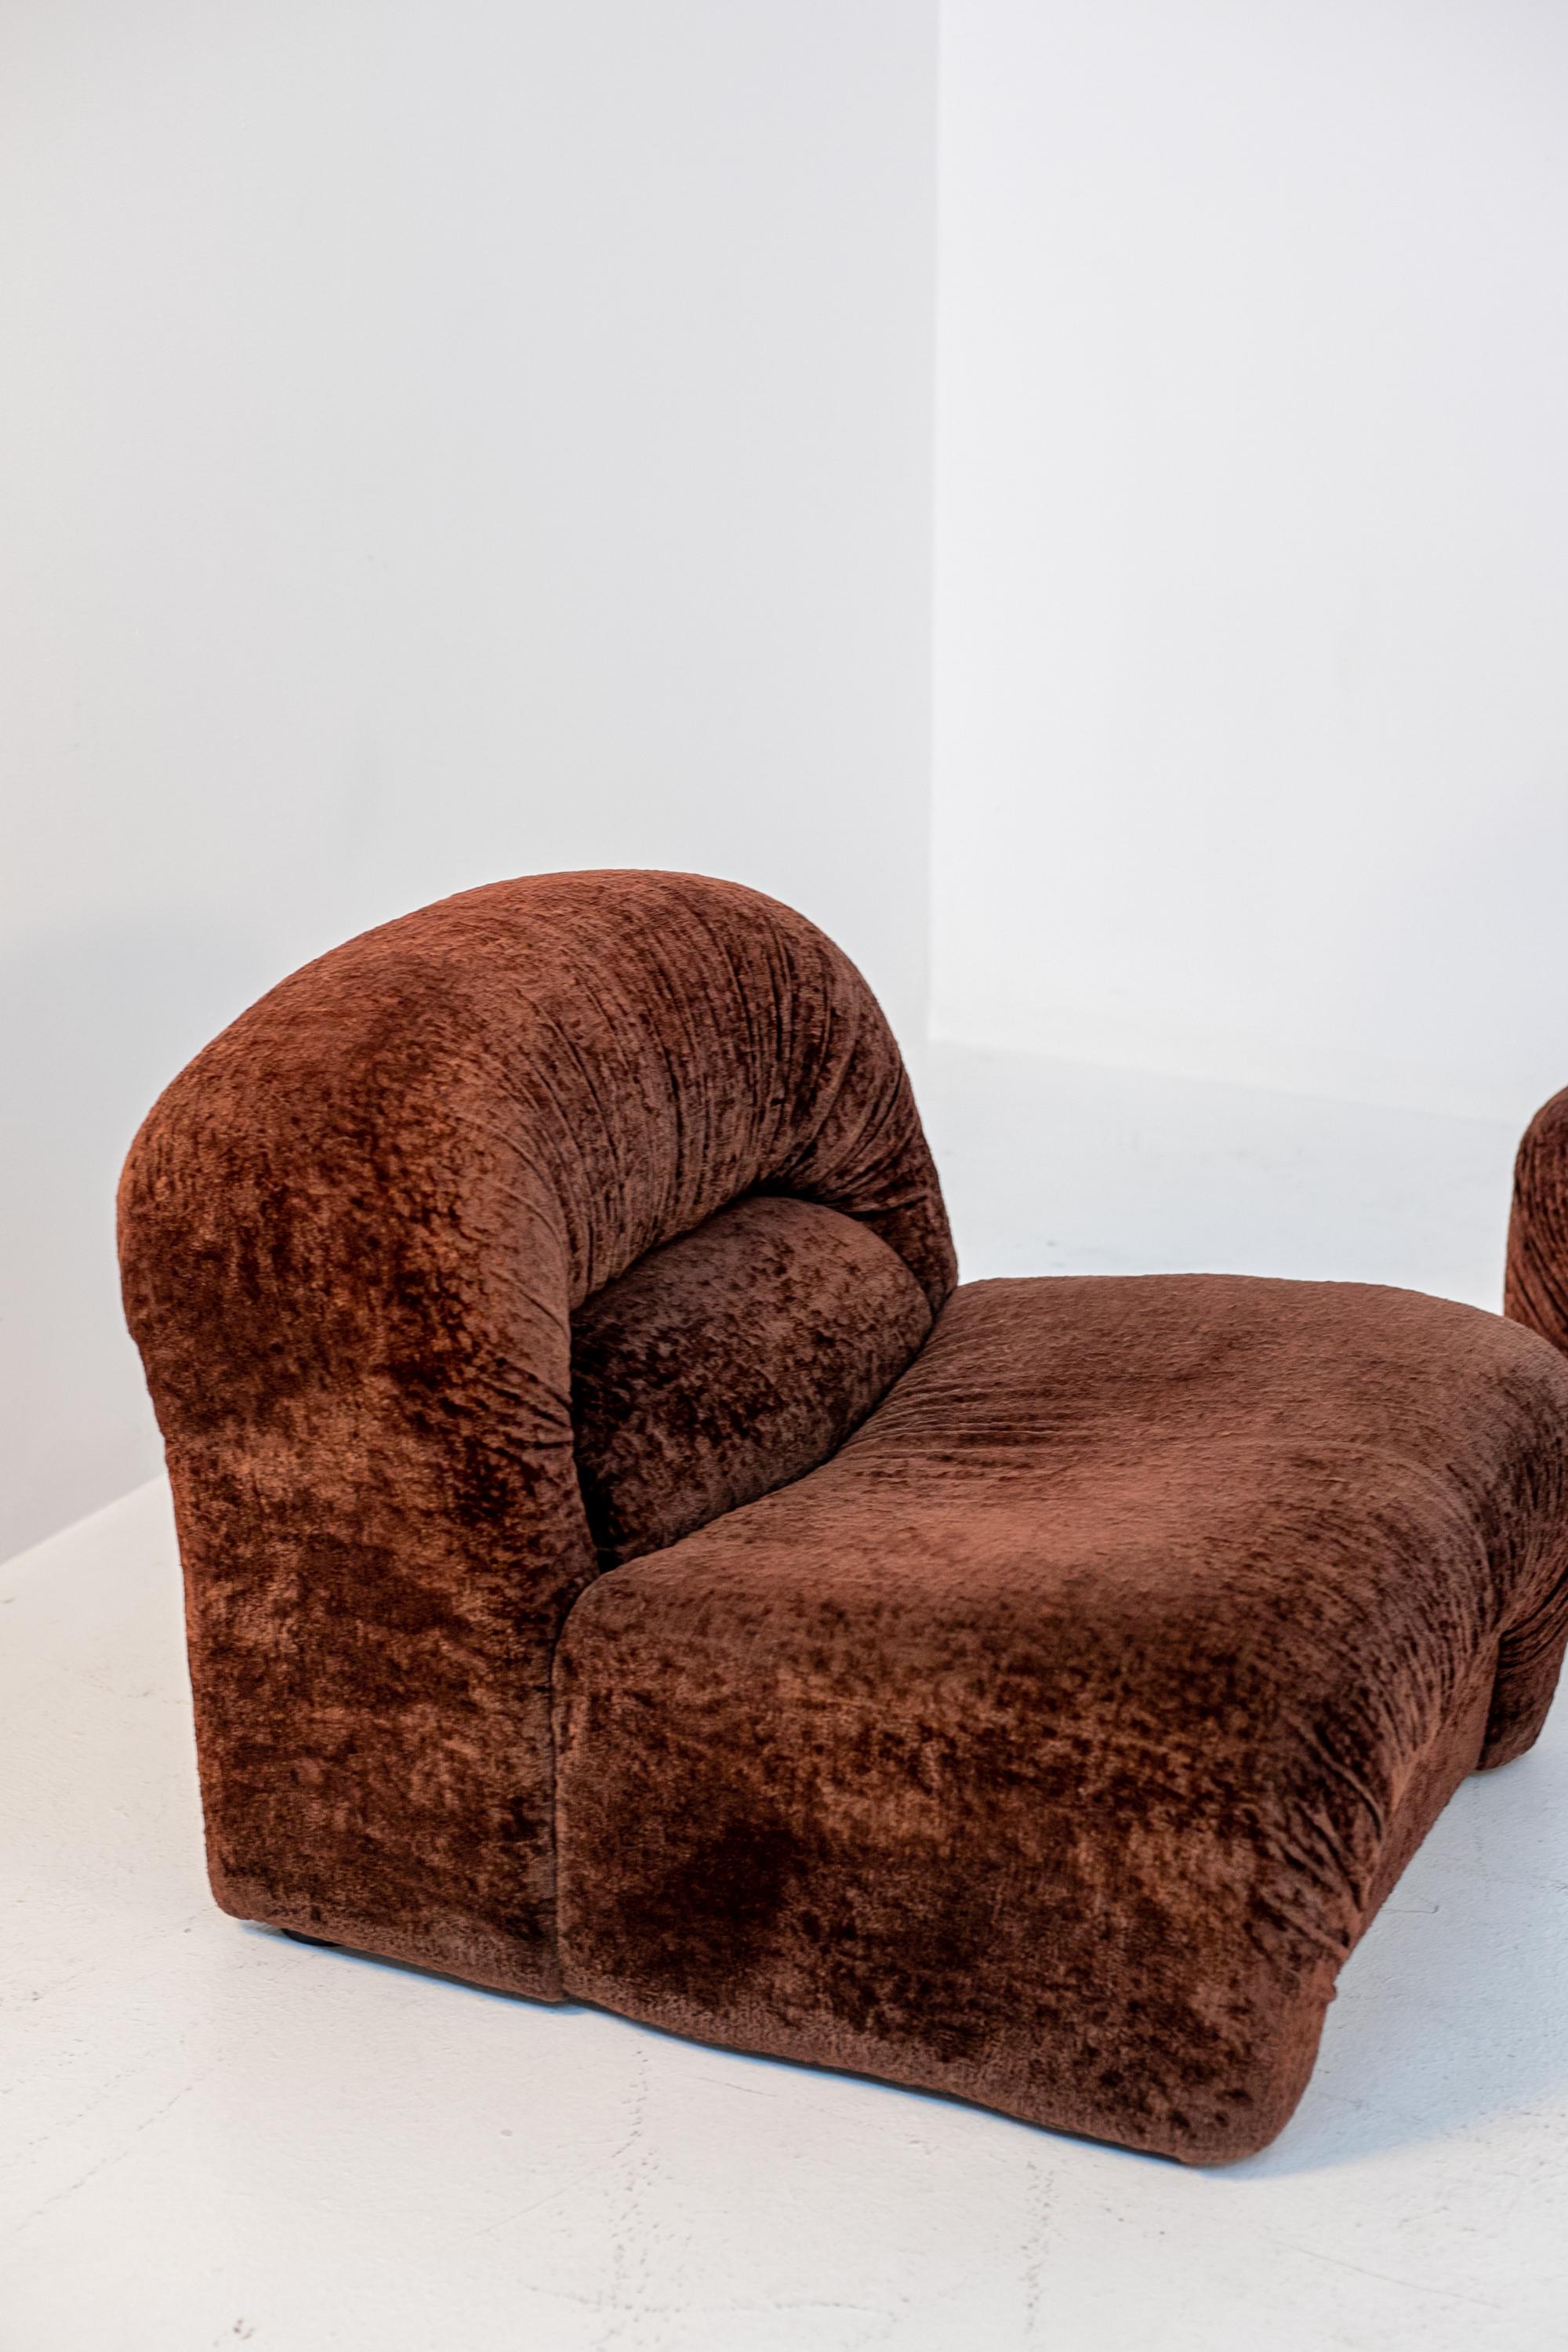 Beautiful pair of 70's Space Age Italian armchairs.
The pair of armchairs have soft and fluid shapes, with very rounded corner. The armchairs have the typical design of the 70s Space Age, where the volume of the curves were very evident and fluid,